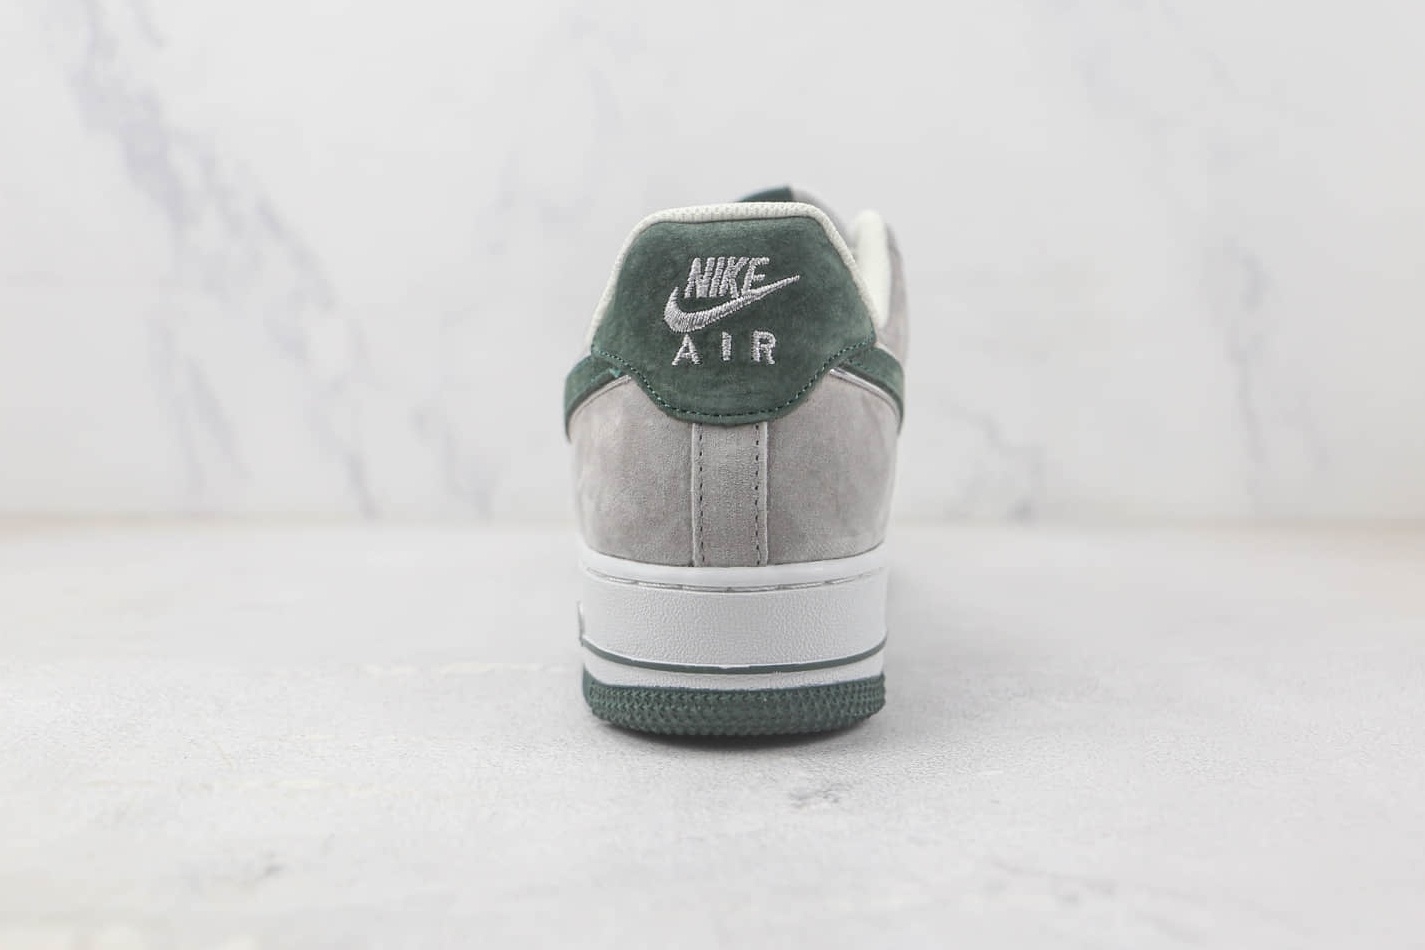 Akira x Nike Air Force 1 07 Low Suede Grey Green DF3966-723 - Shop Now!